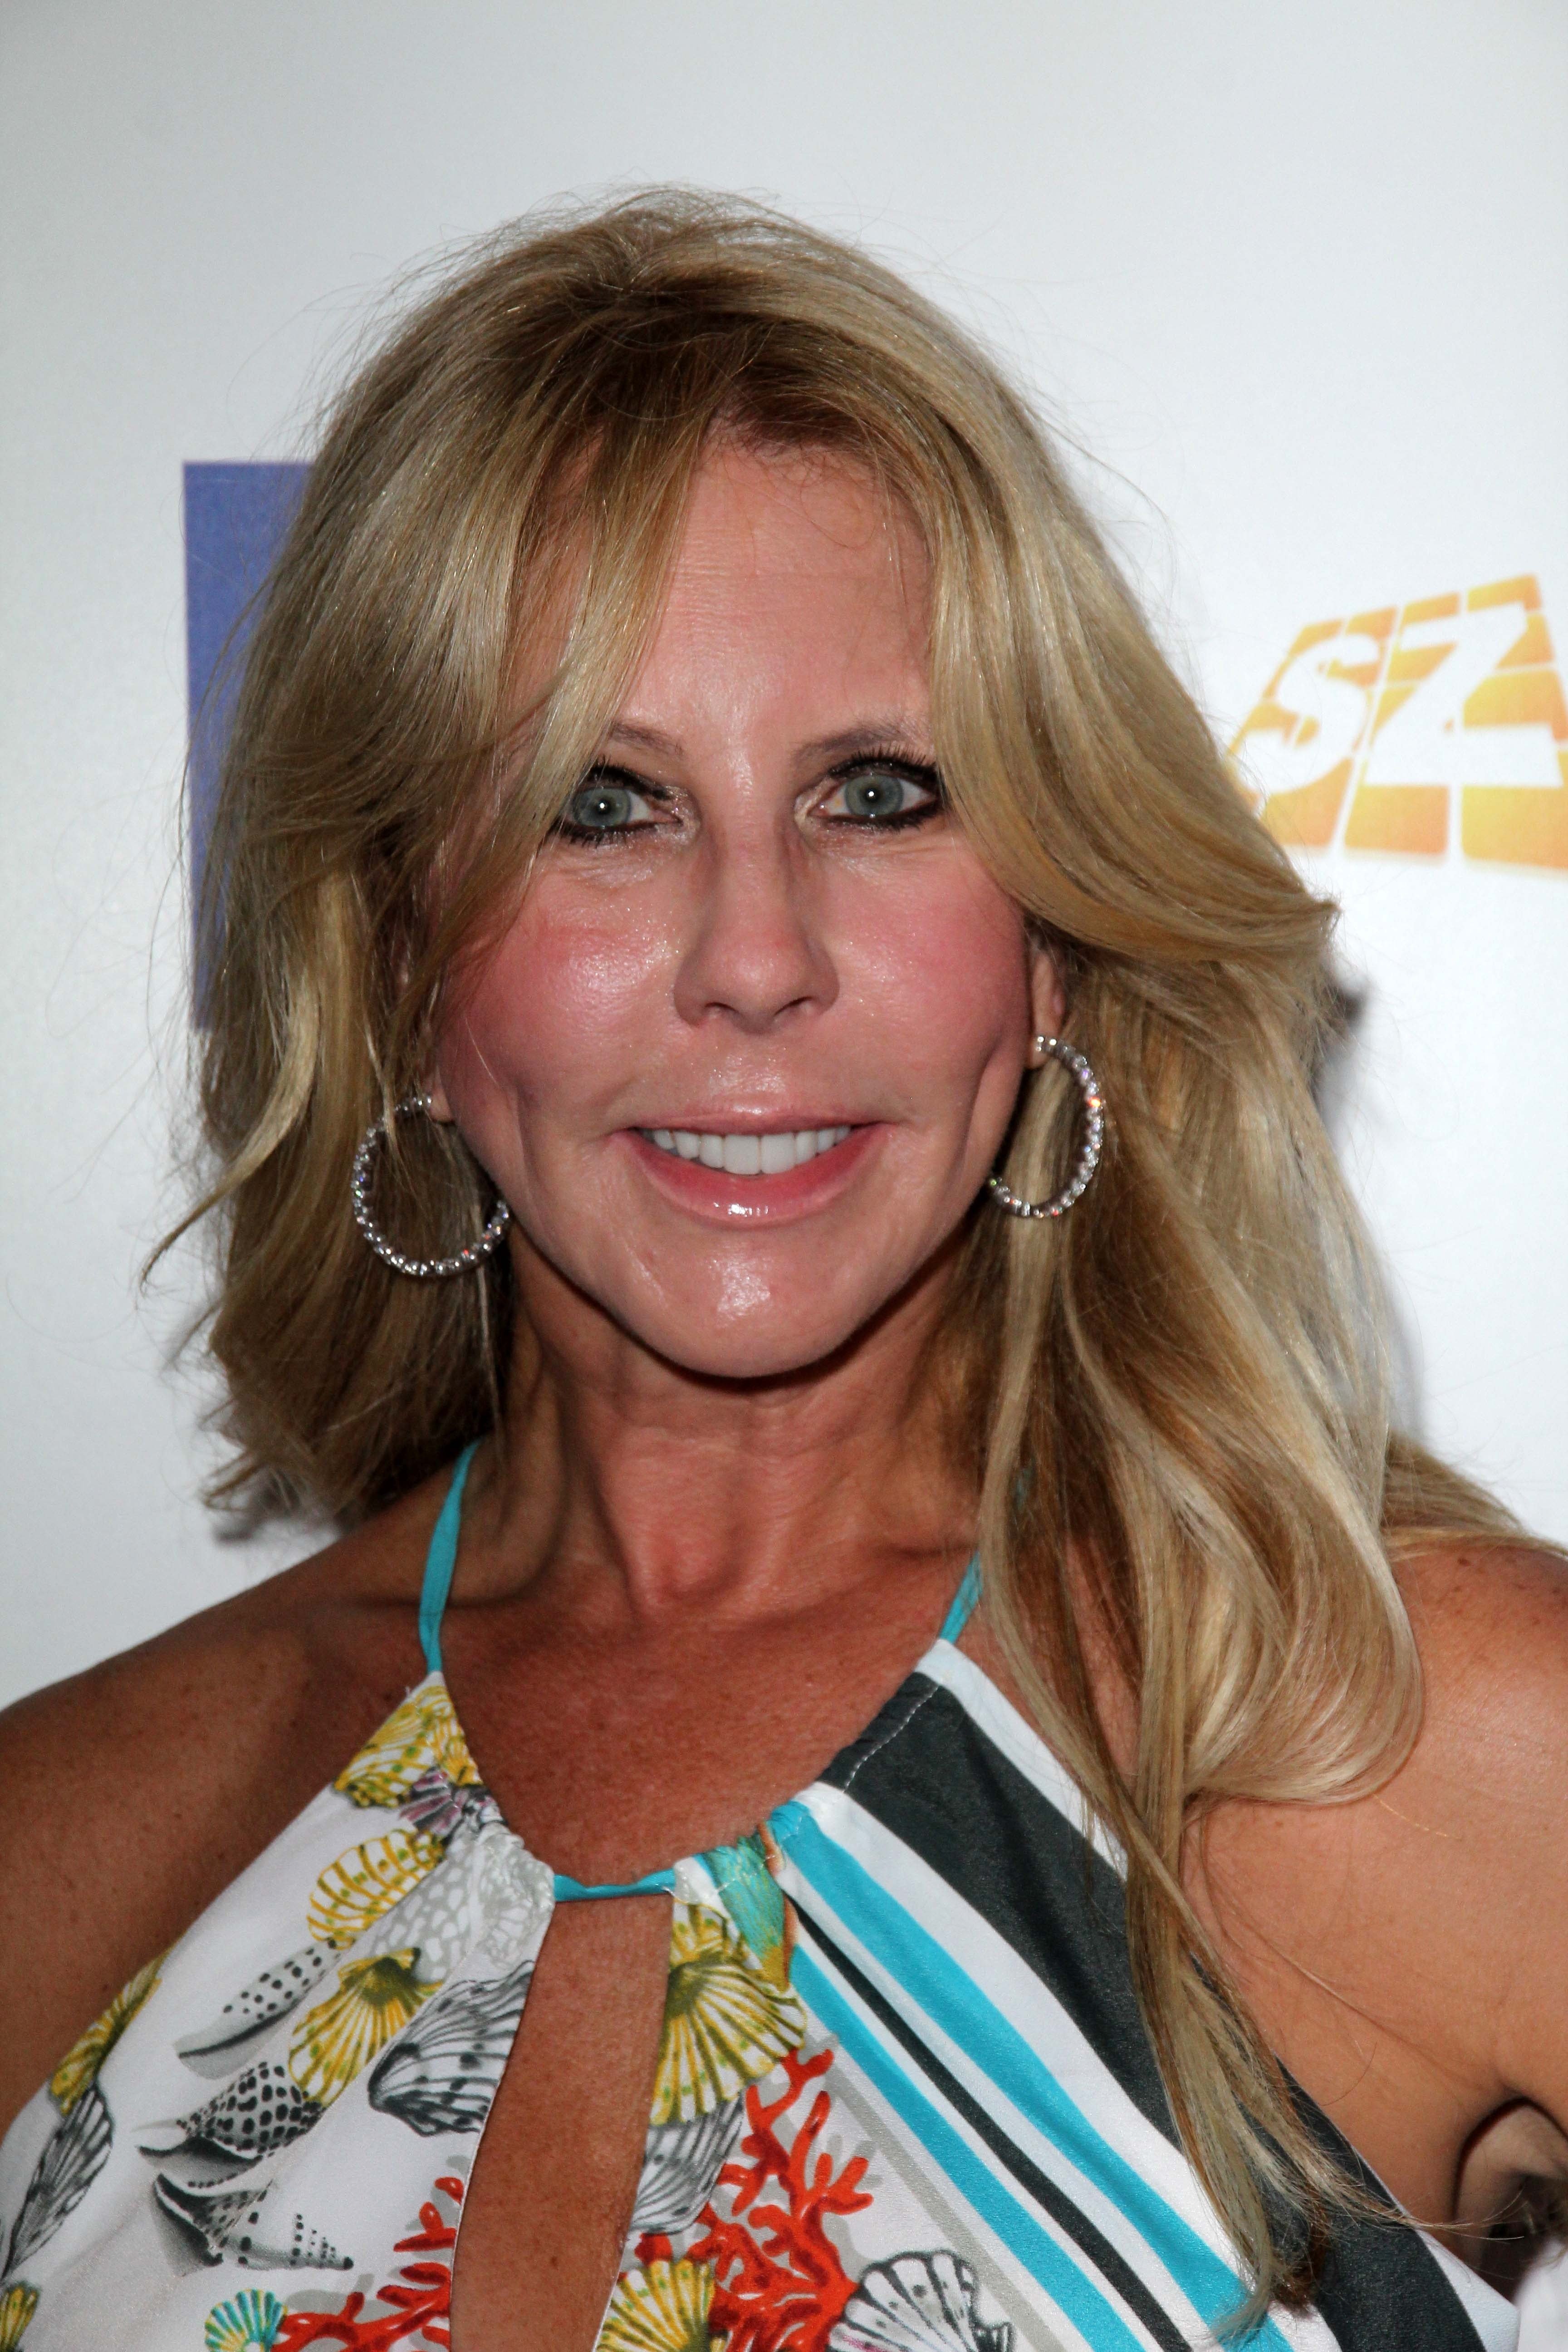 Vicki Gunvalson at the 2nd Annual Red Carpet event at SLS Hotel on August 9, 2012 Beverly Hills, California | Photo: Shutterstock